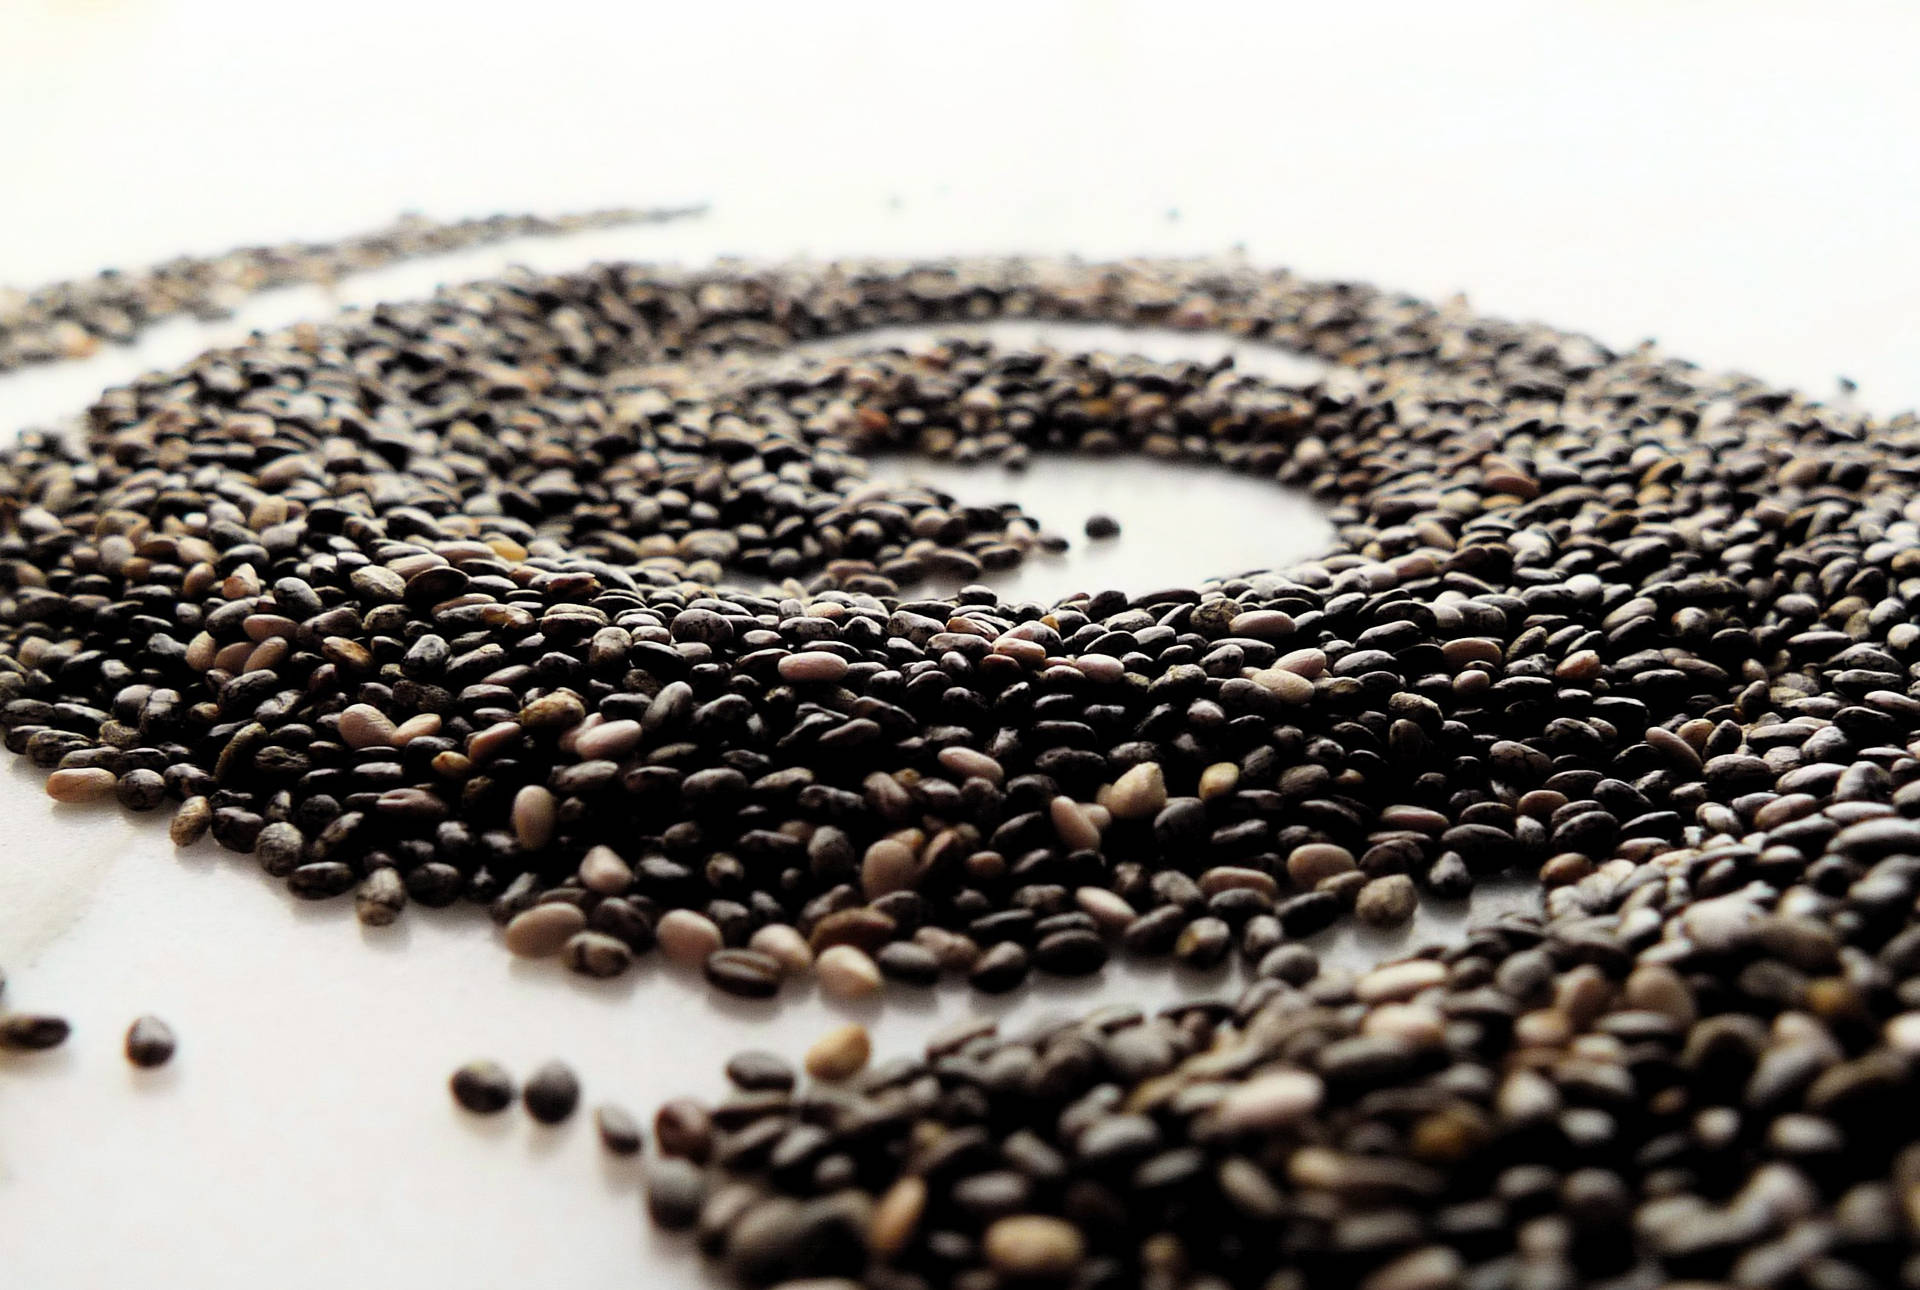 Nutritious Chia Seeds in Distinct Spiral Formation Wallpaper